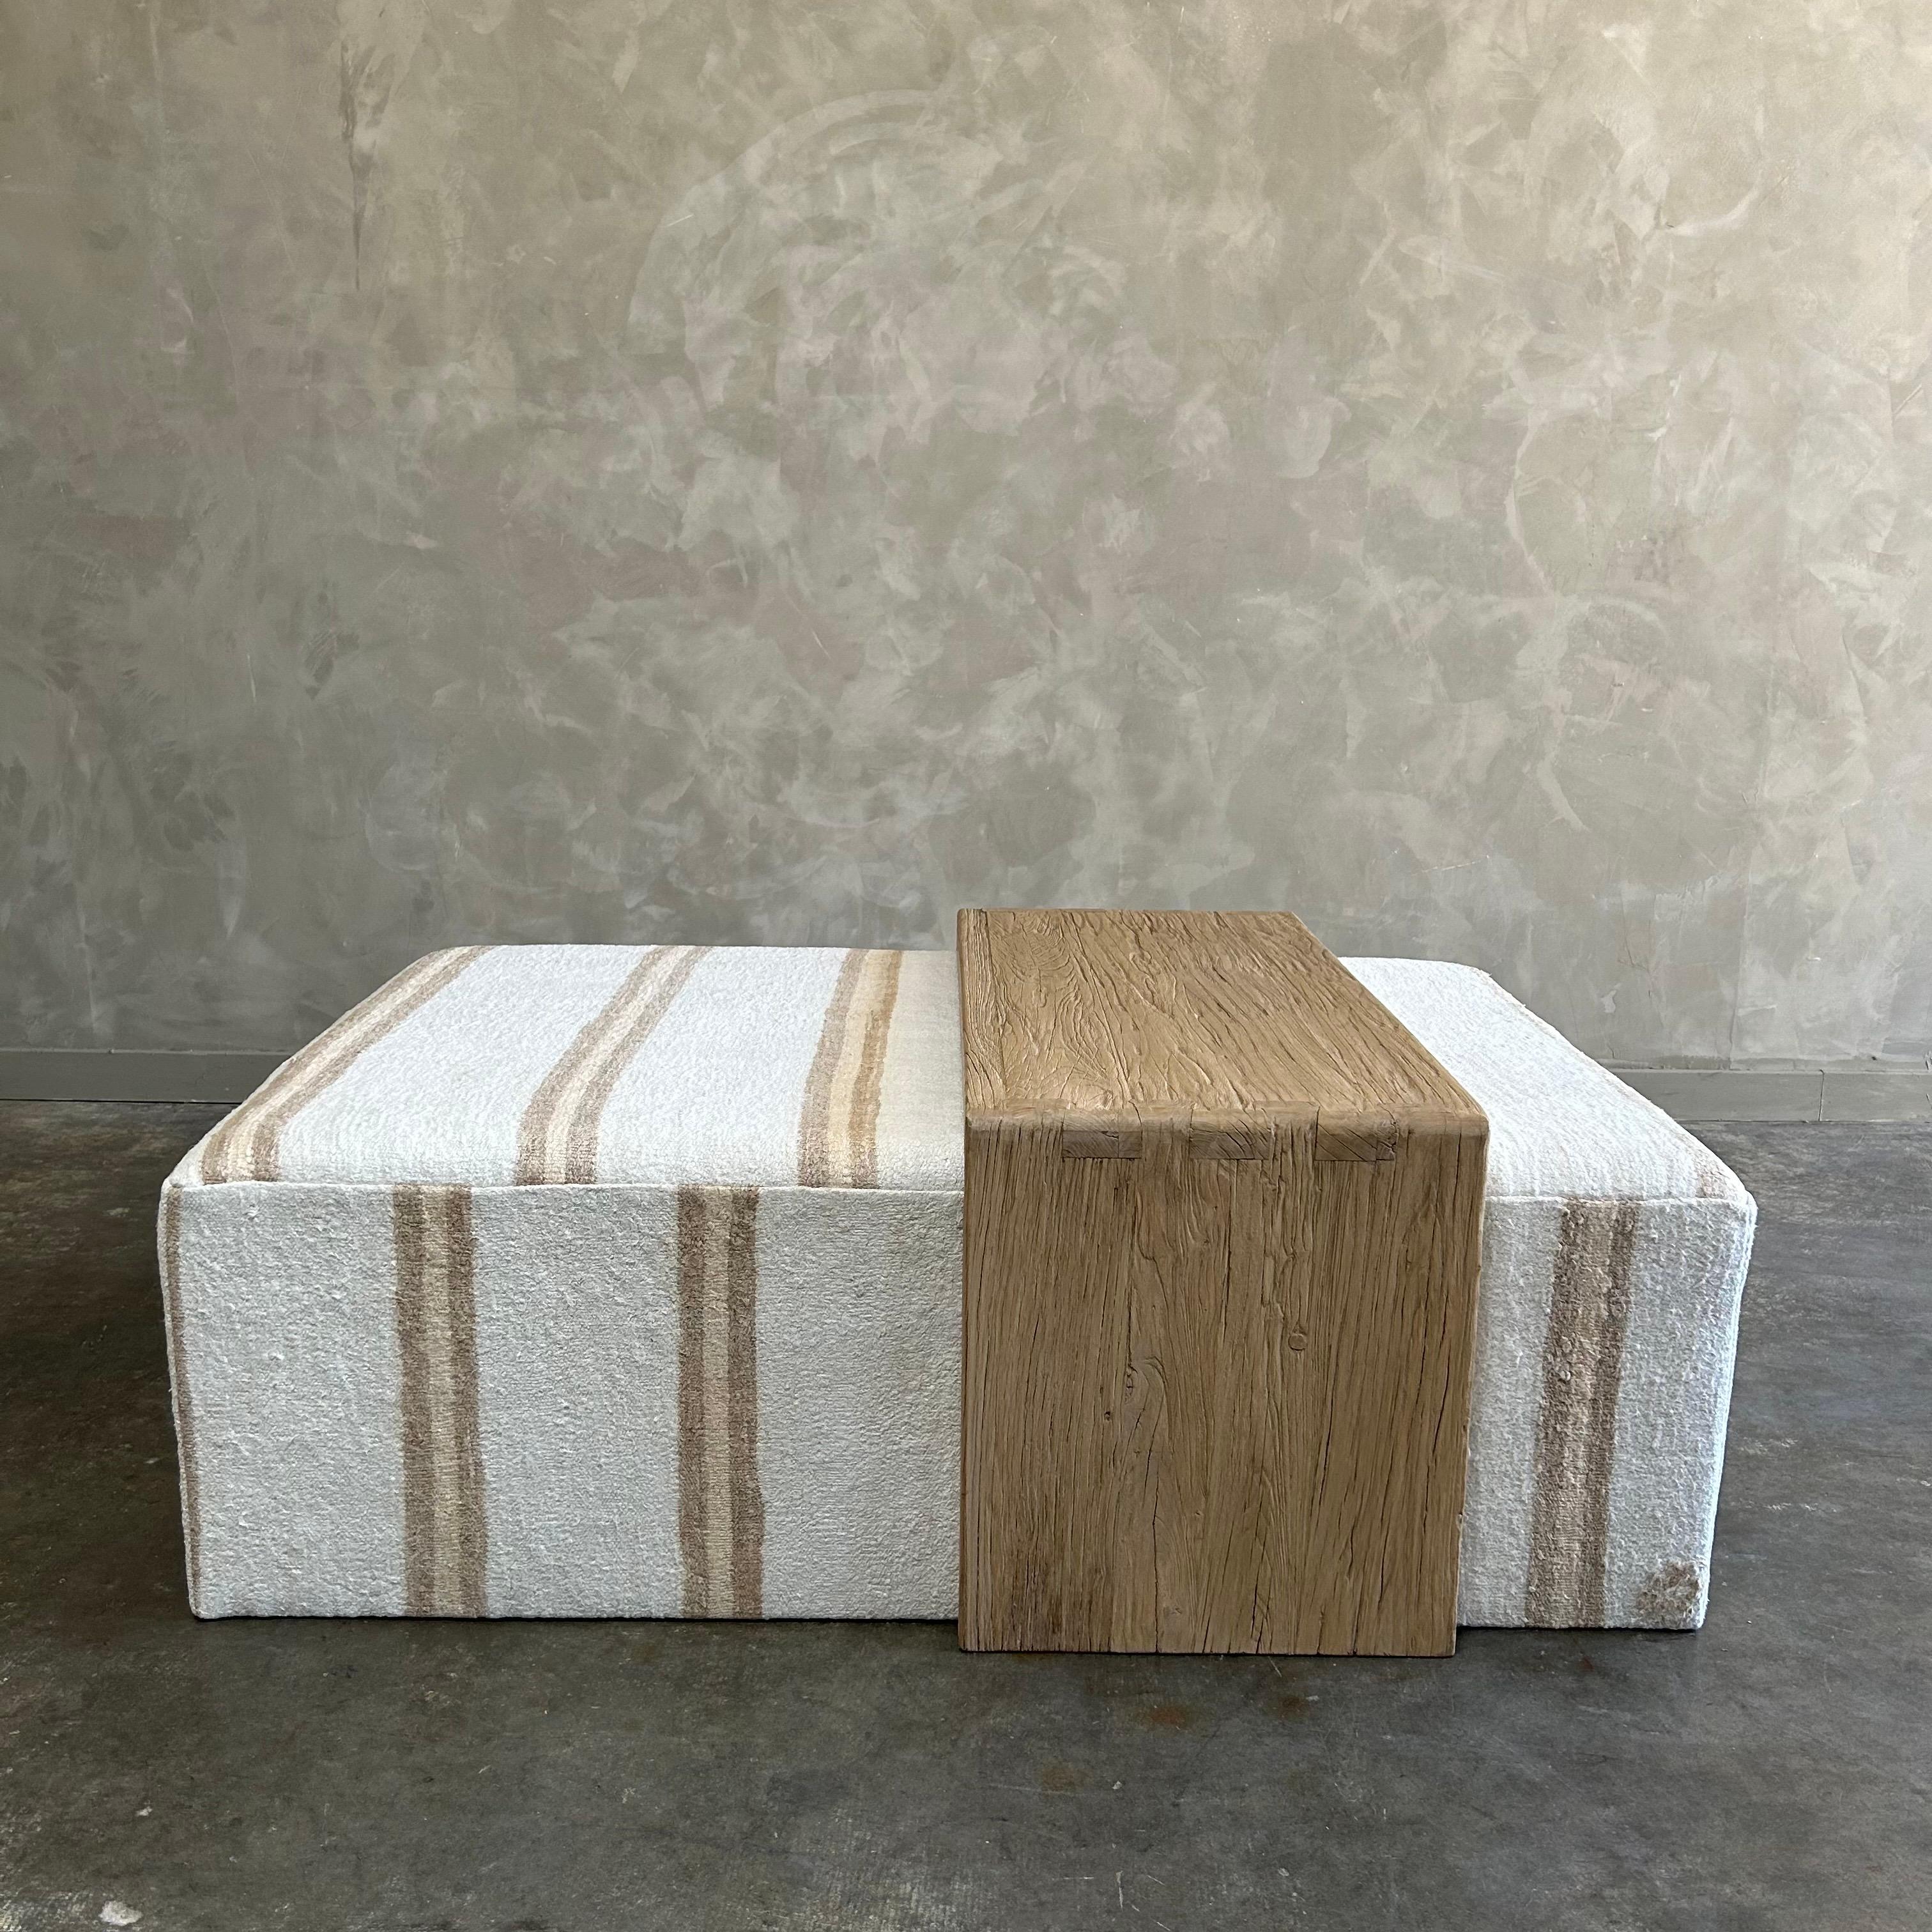 Our cube ottoman is upholstered in a beautiful hemp rug with stripes. A light color with flax natural stripes give this a versatile style. The hand-crafted solid elm wood waterfall has unique characteristics with beautiful grain and texture.